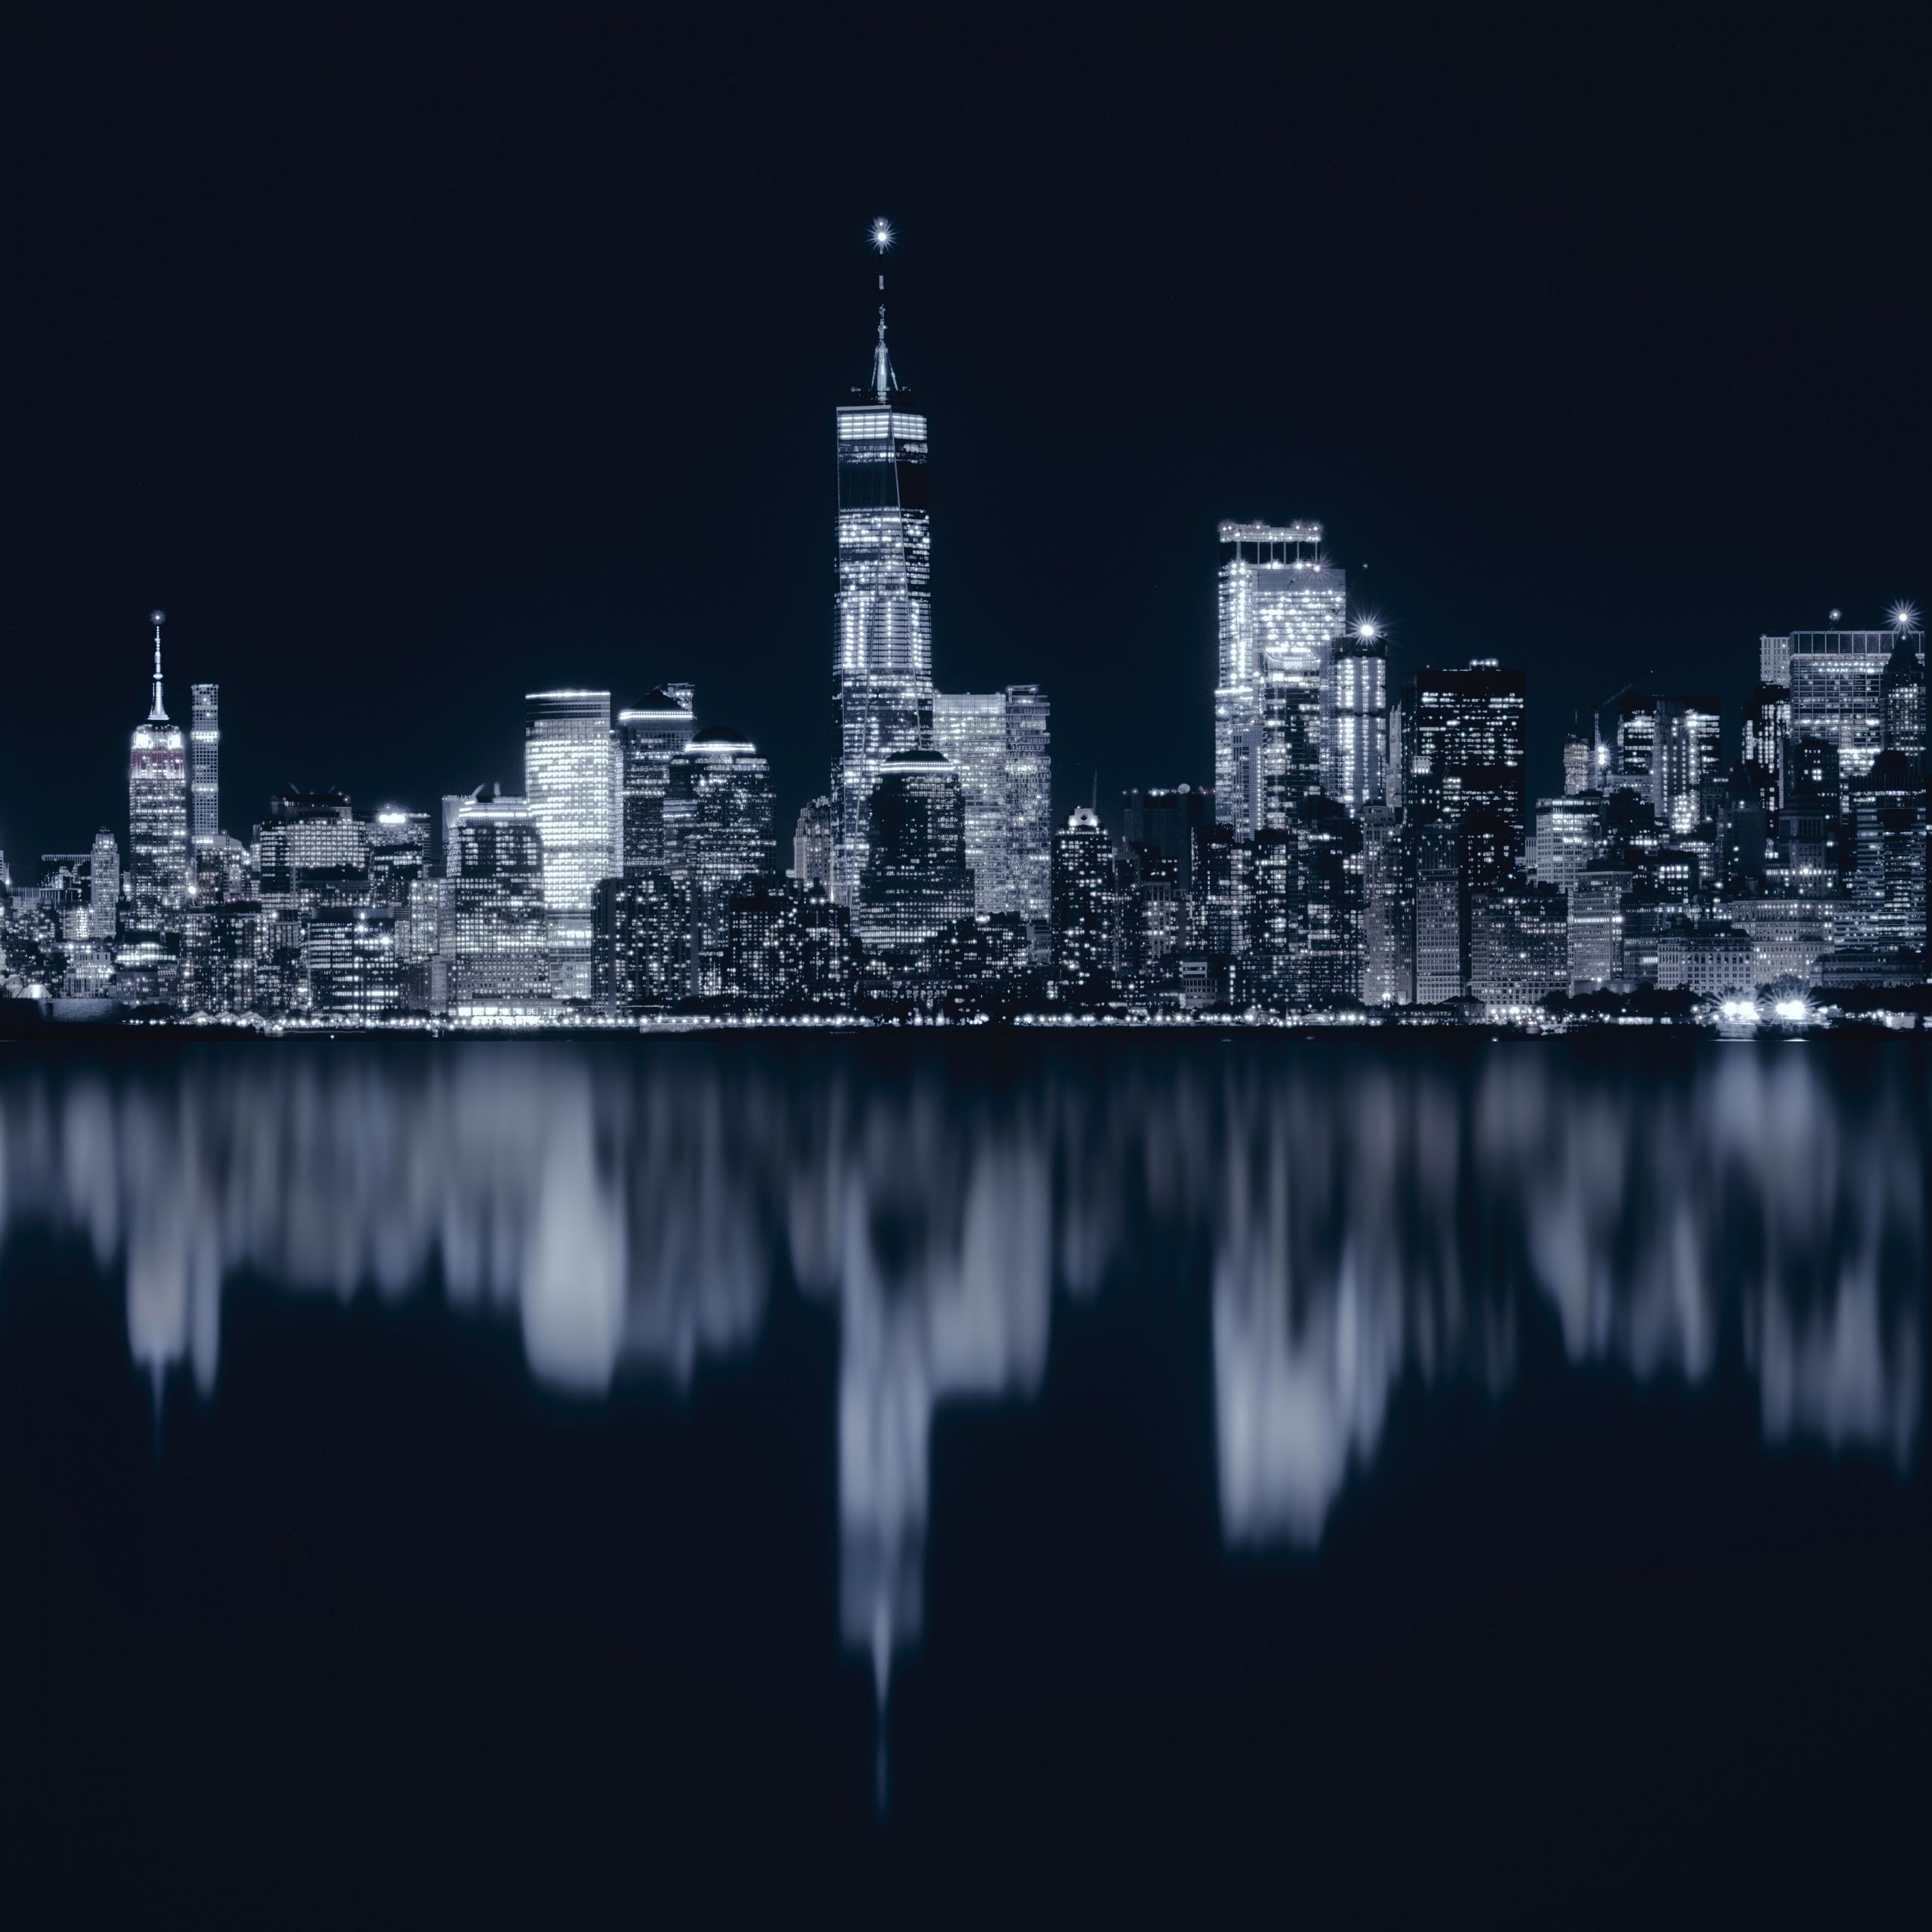 A black and white photo of the New York skyline at night - Night, New York, city, anime city, cityscape